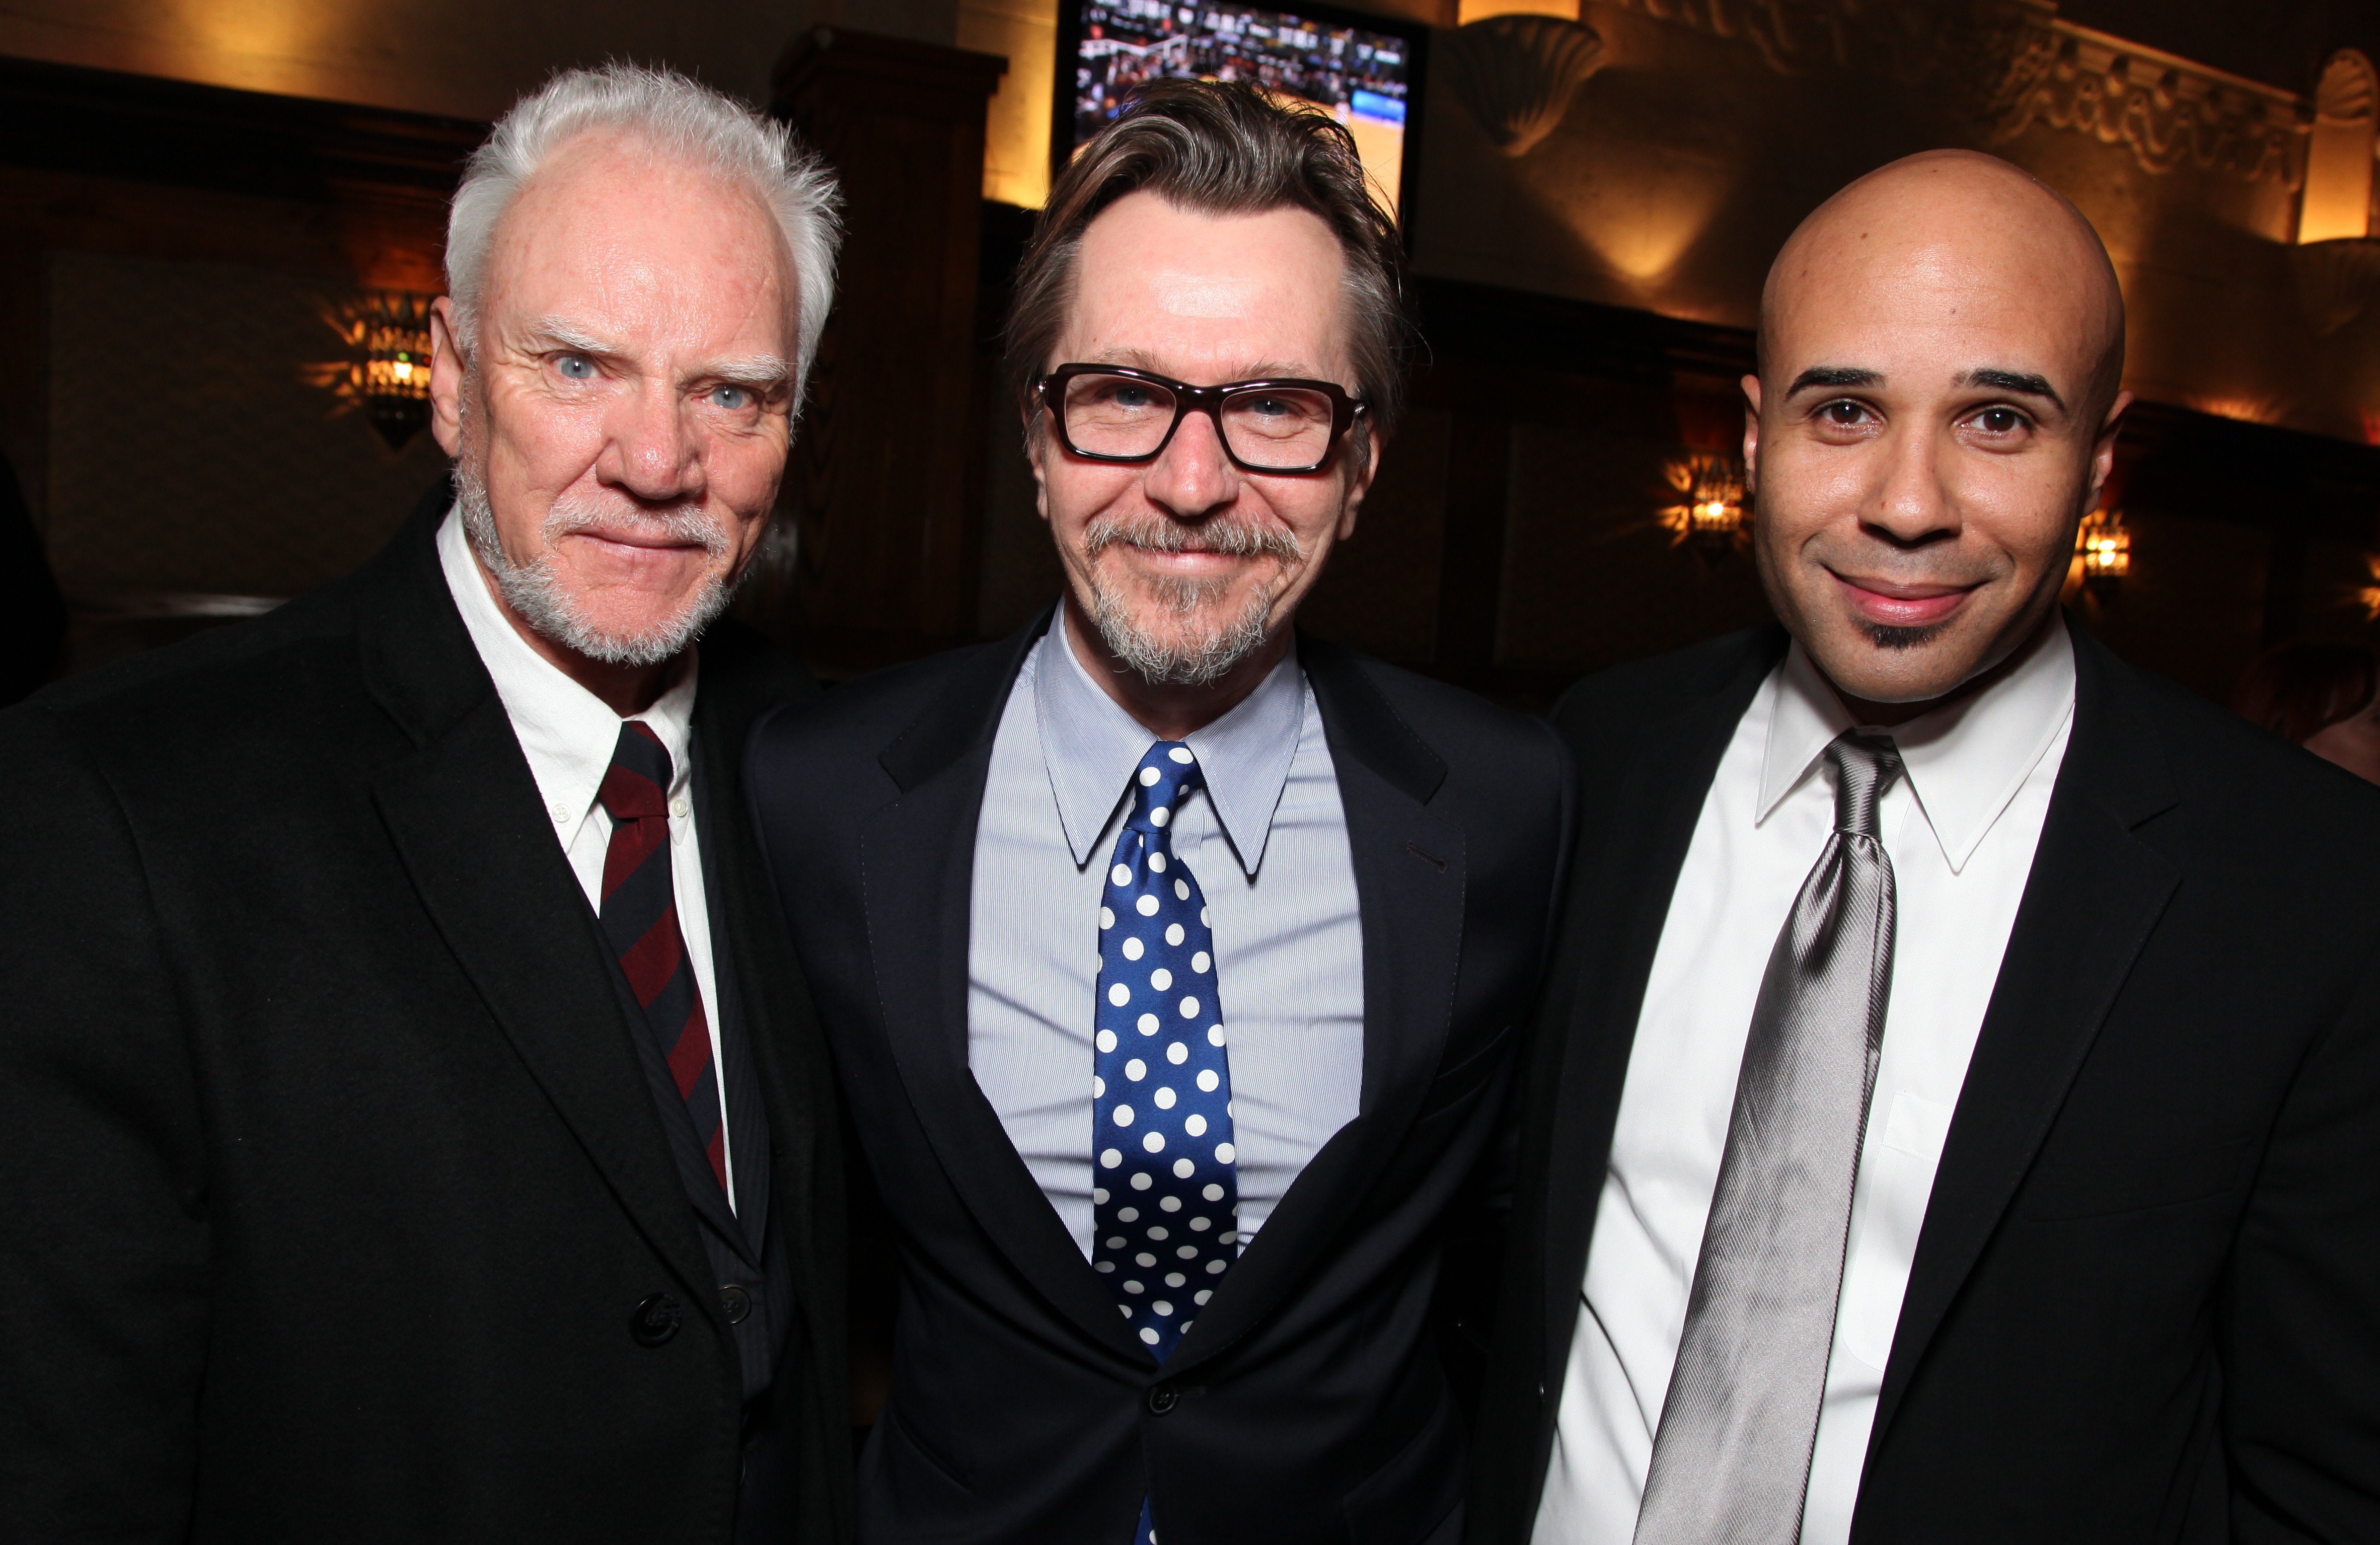 Actor's Malcolm McDowell, Gary Oldman and Manager/Producer Chris Roe. Malcolm McDowell Honored With A Star On The Hollywood Walk Of Fame on March 16, 2012 in Hollywood, California.